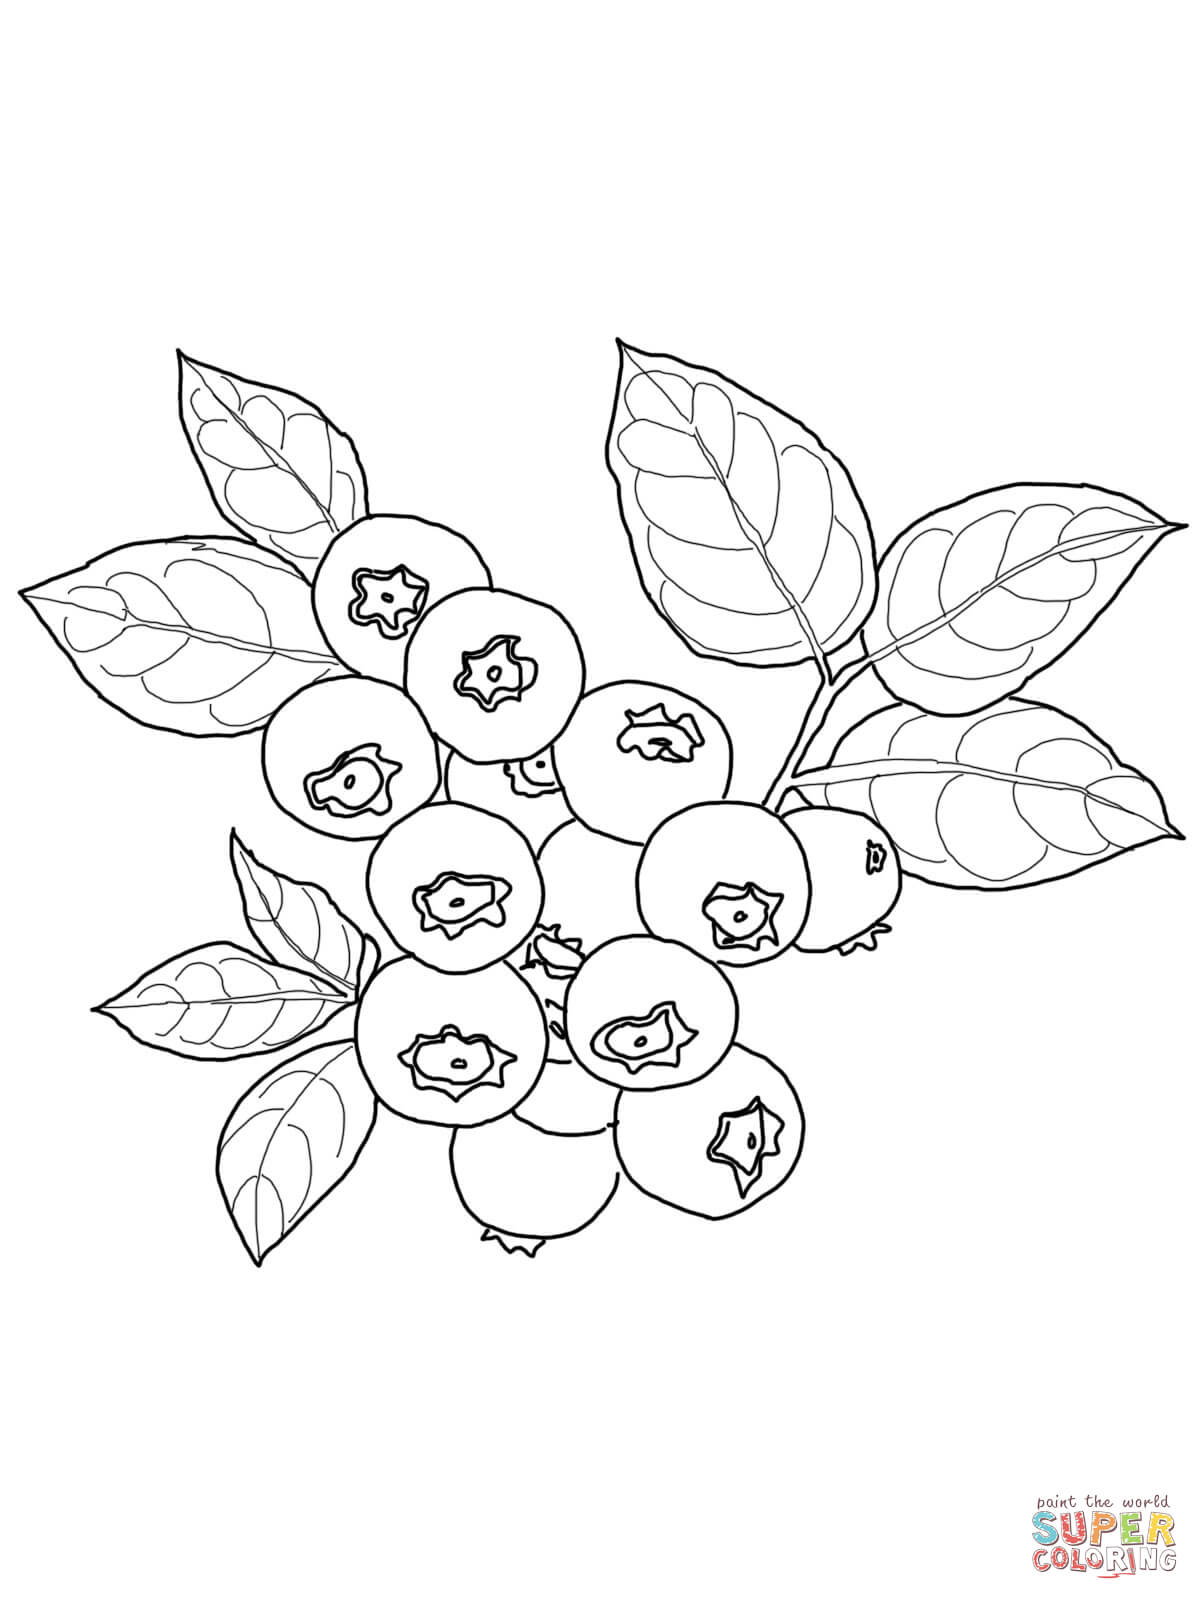 Blueberry coloring pages | Free Coloring Pages